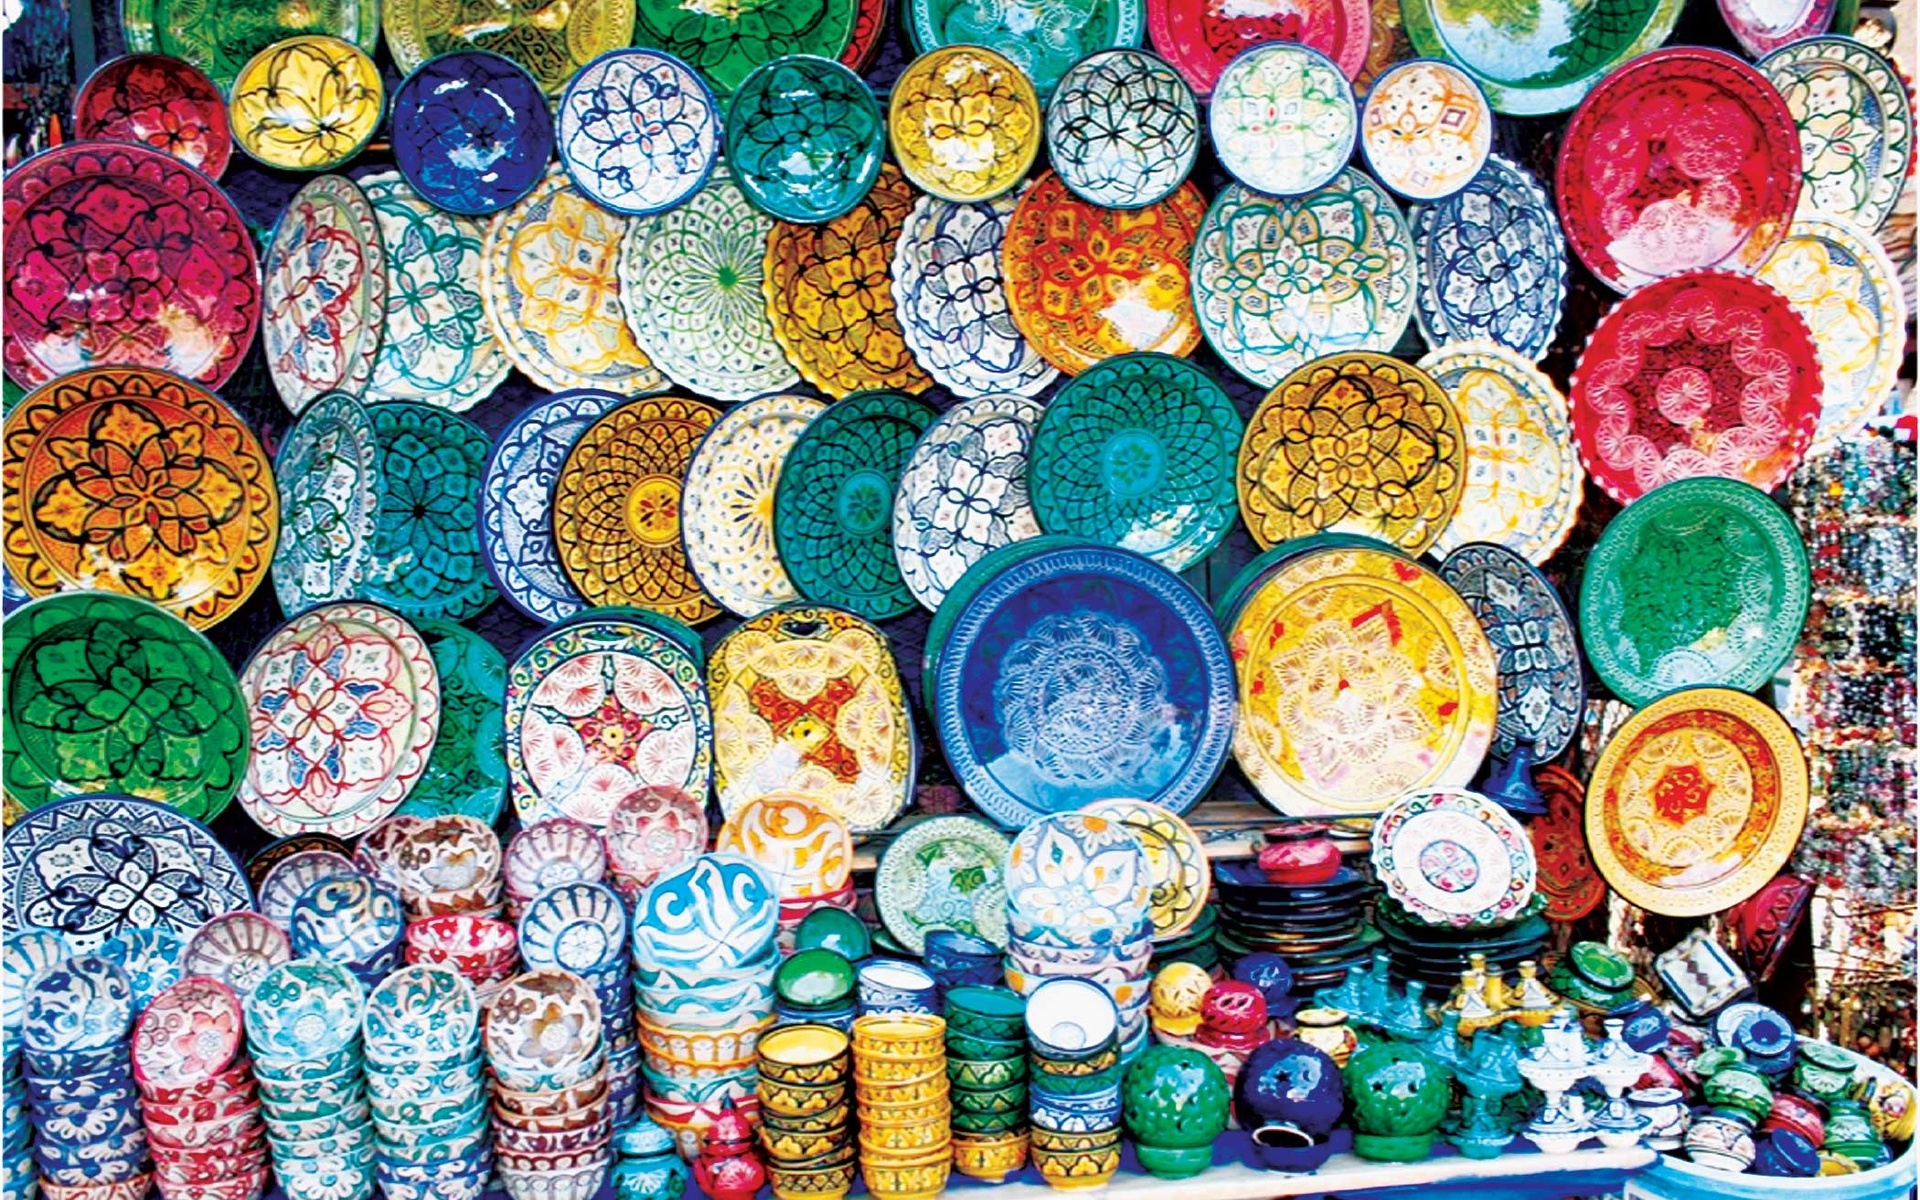 Typical and original souvenirs from Spain